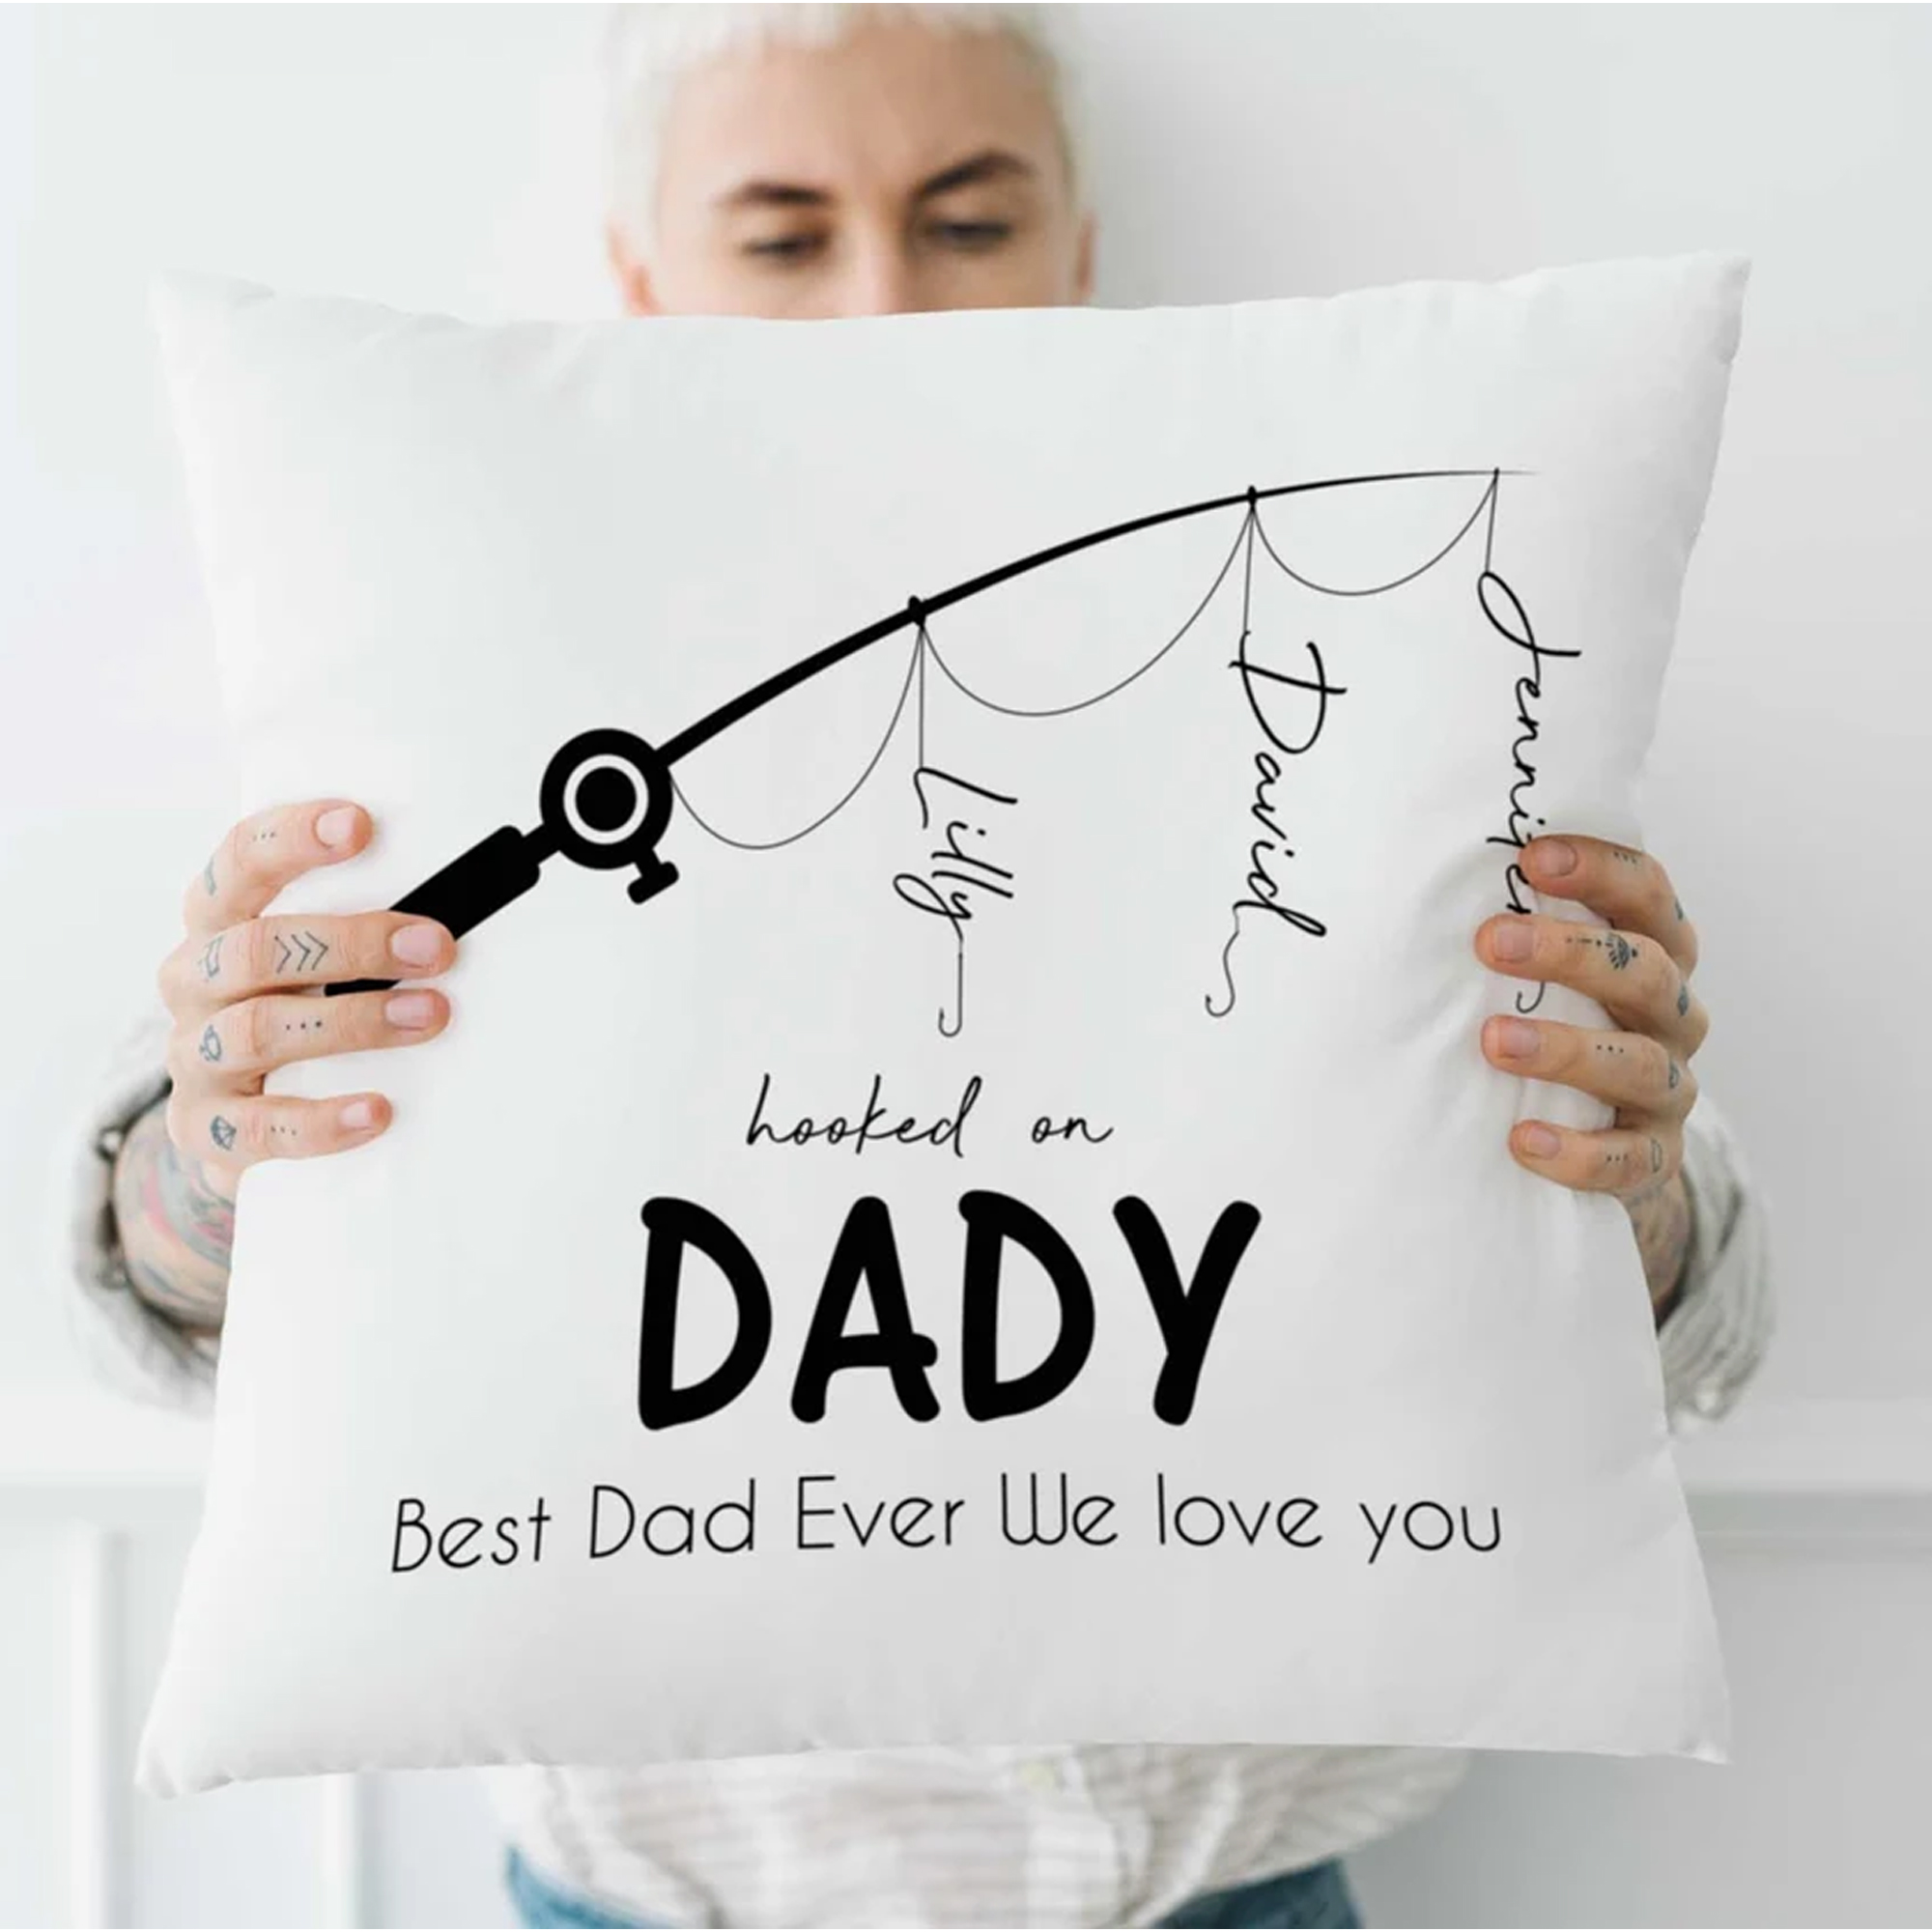 Best Dad Ever Custom Pillowcase Personalized Name Text Pillowcase Personalized Gifts Housewarming Gifts Gifts For Him Fathers Day Gifts